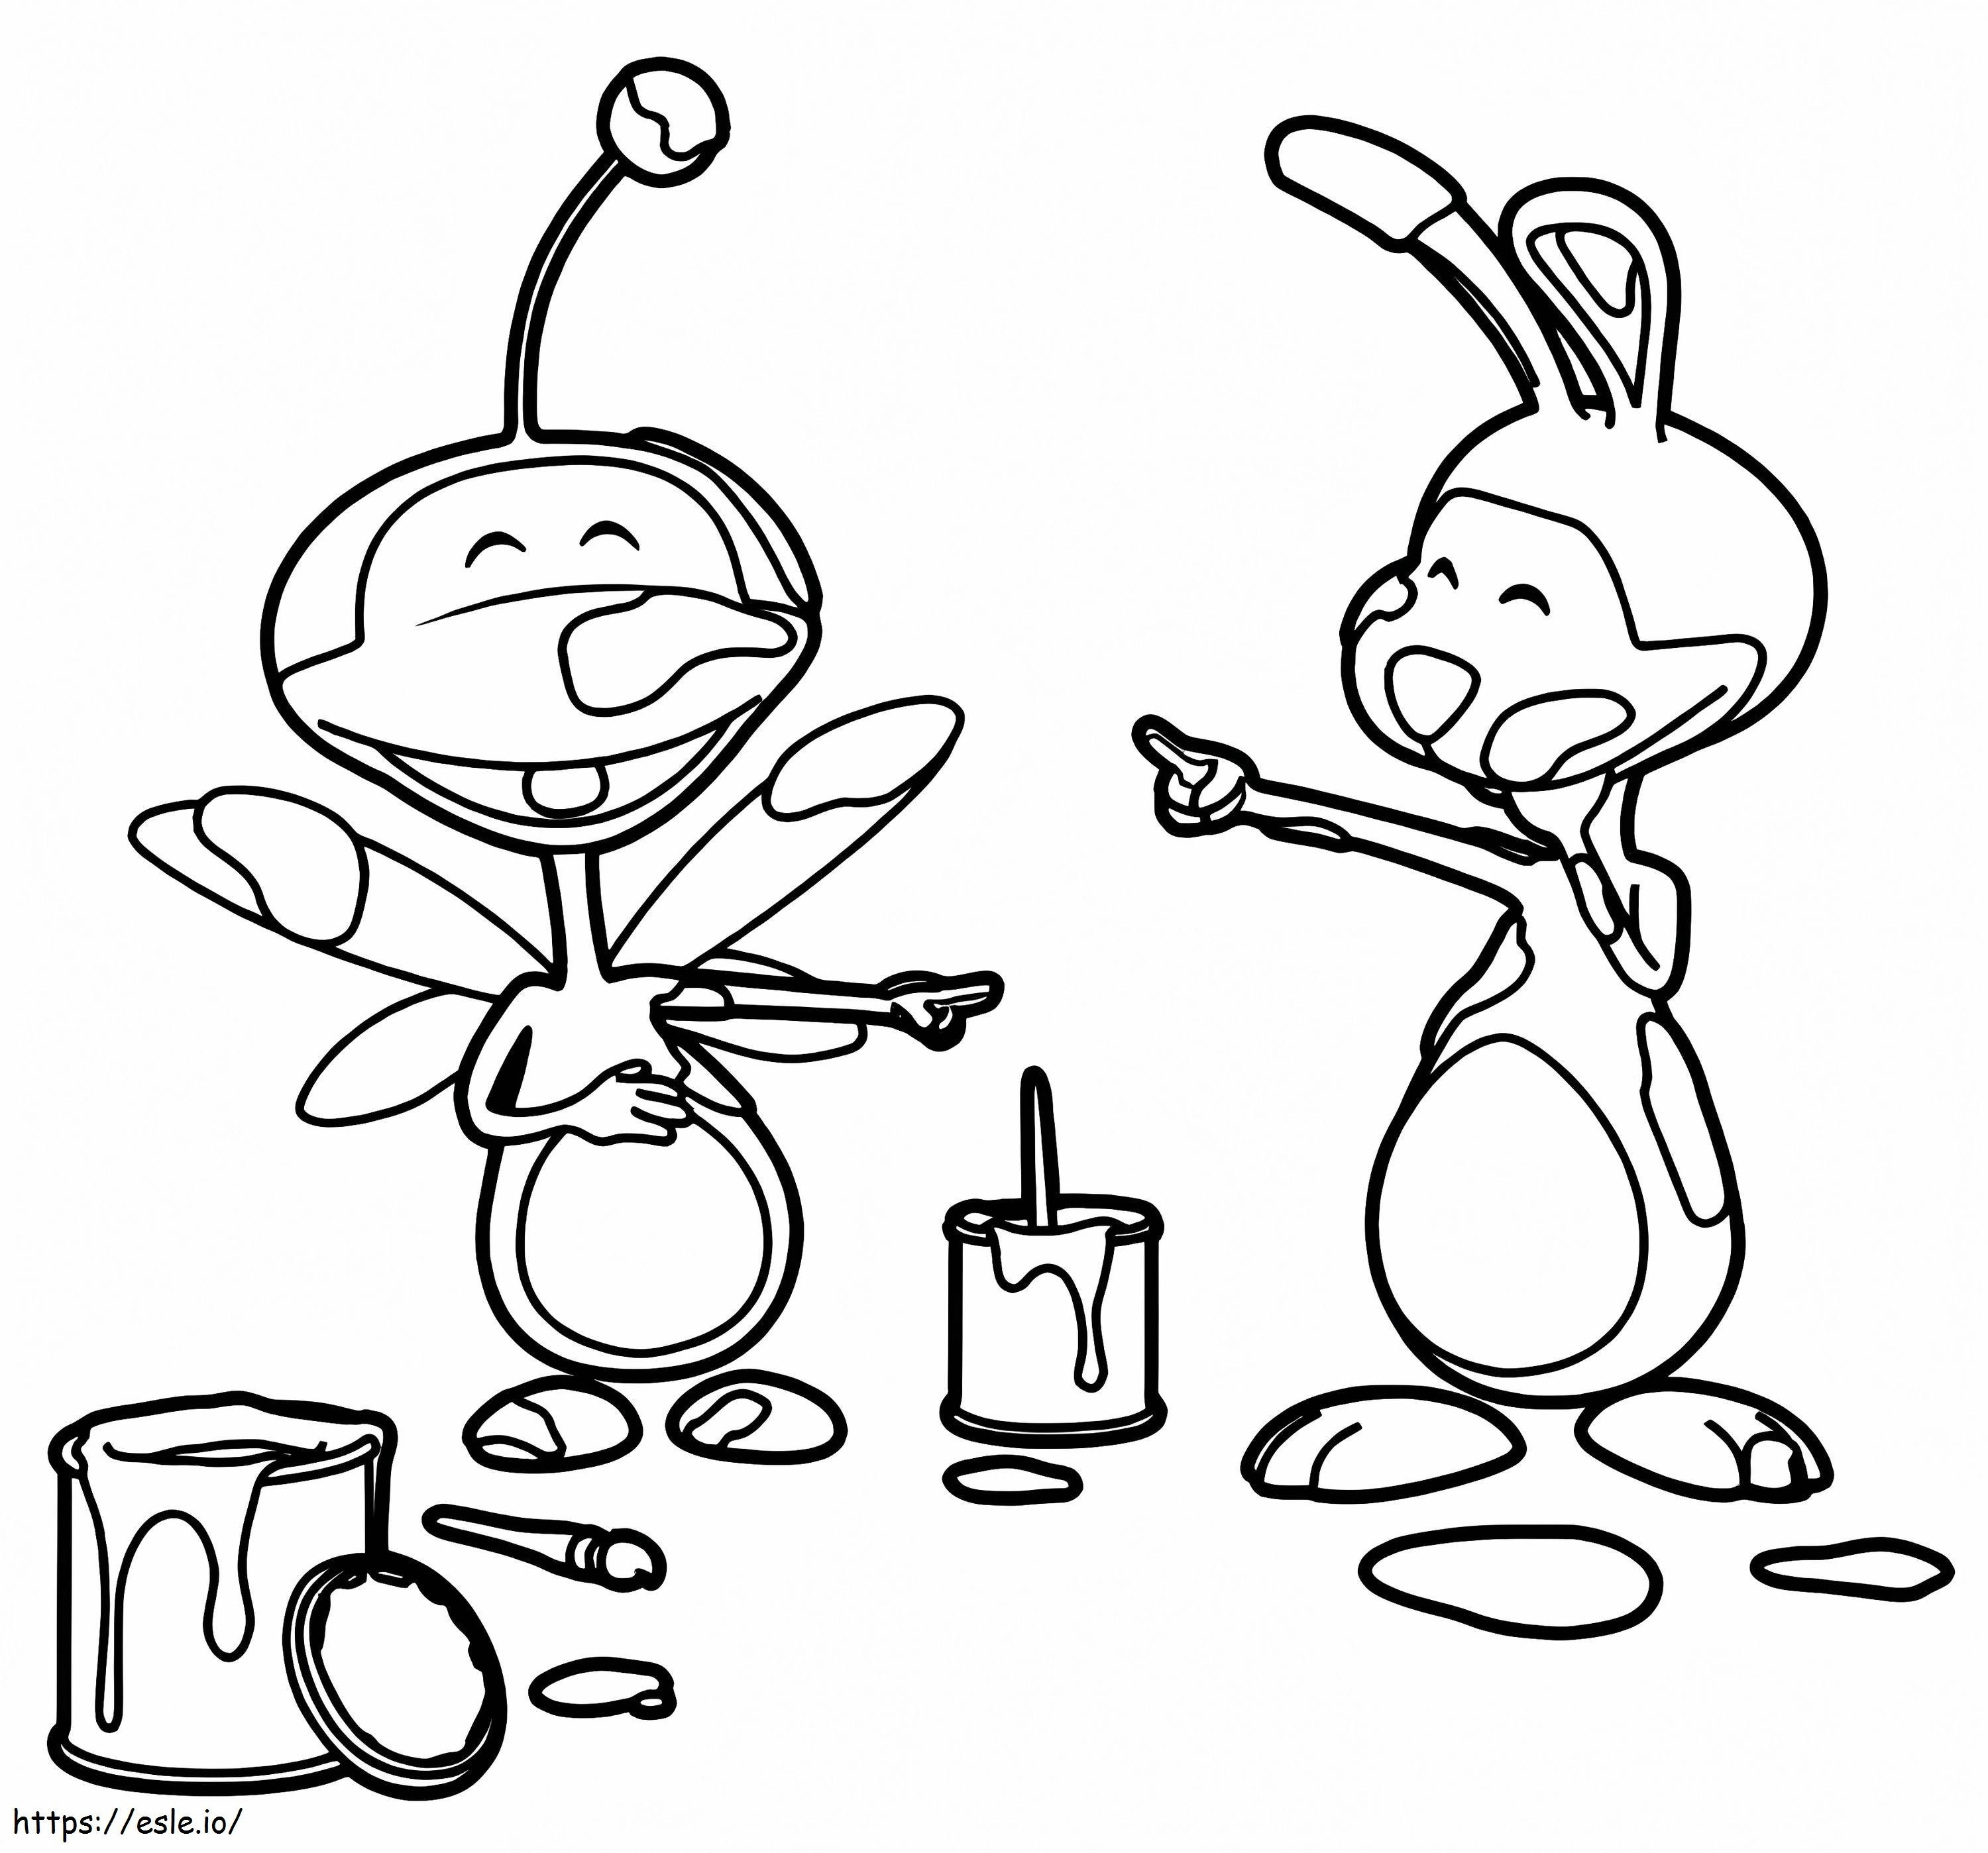 Uki And Rabbit coloring page